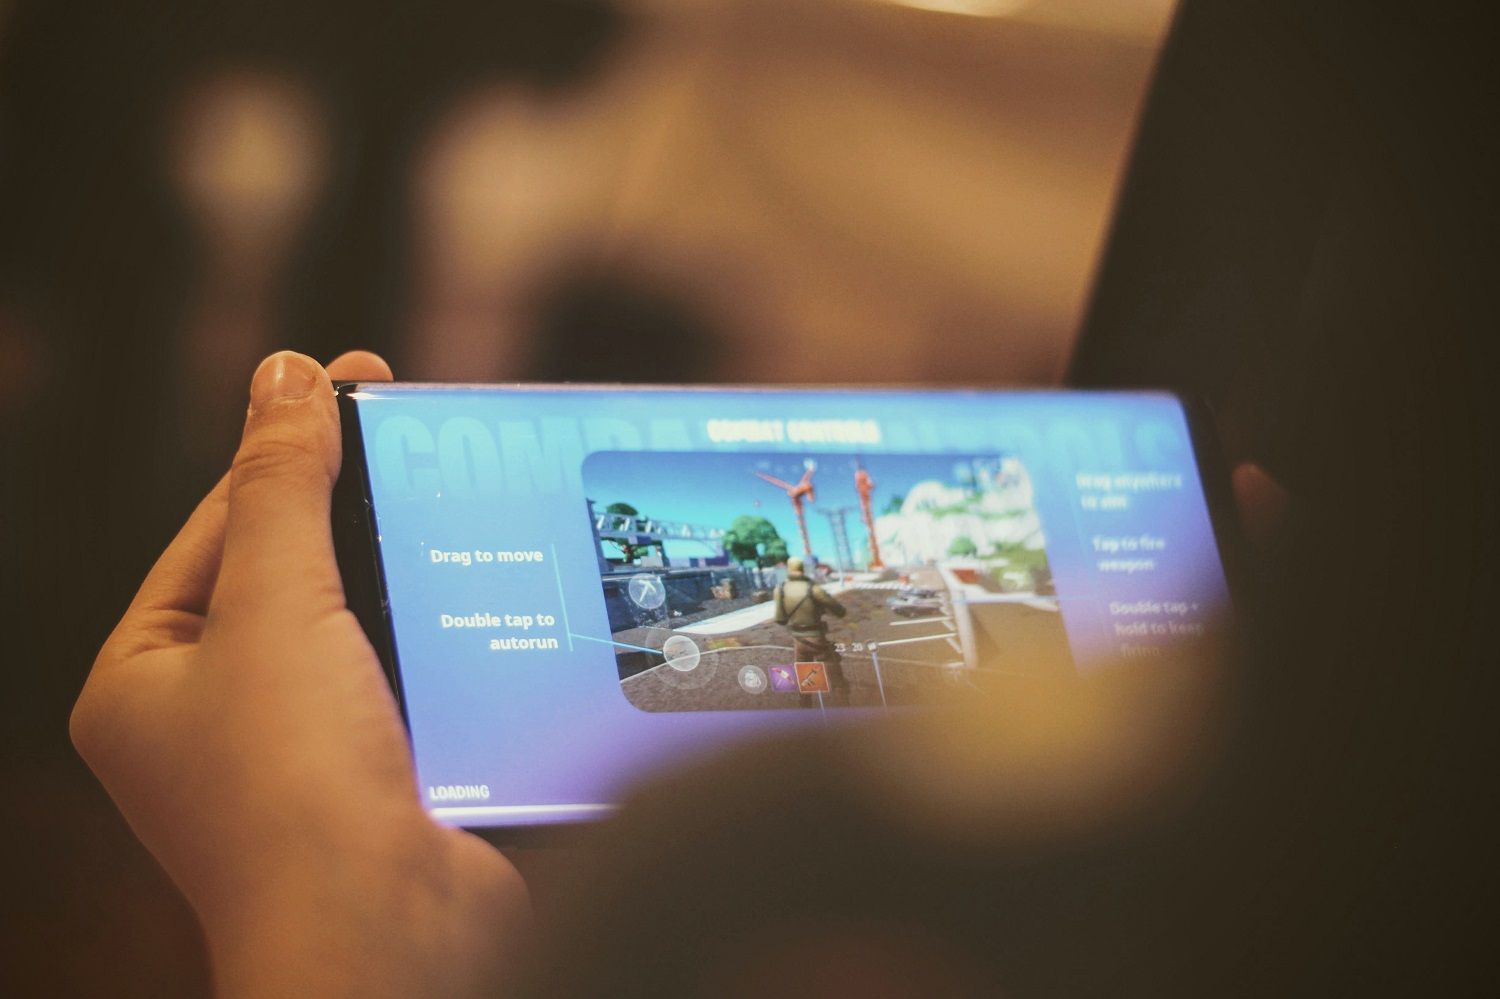 LVMH Teams Up With Fortnite Creator Epic Games to Offer Virtual Experiences  - Bloomberg